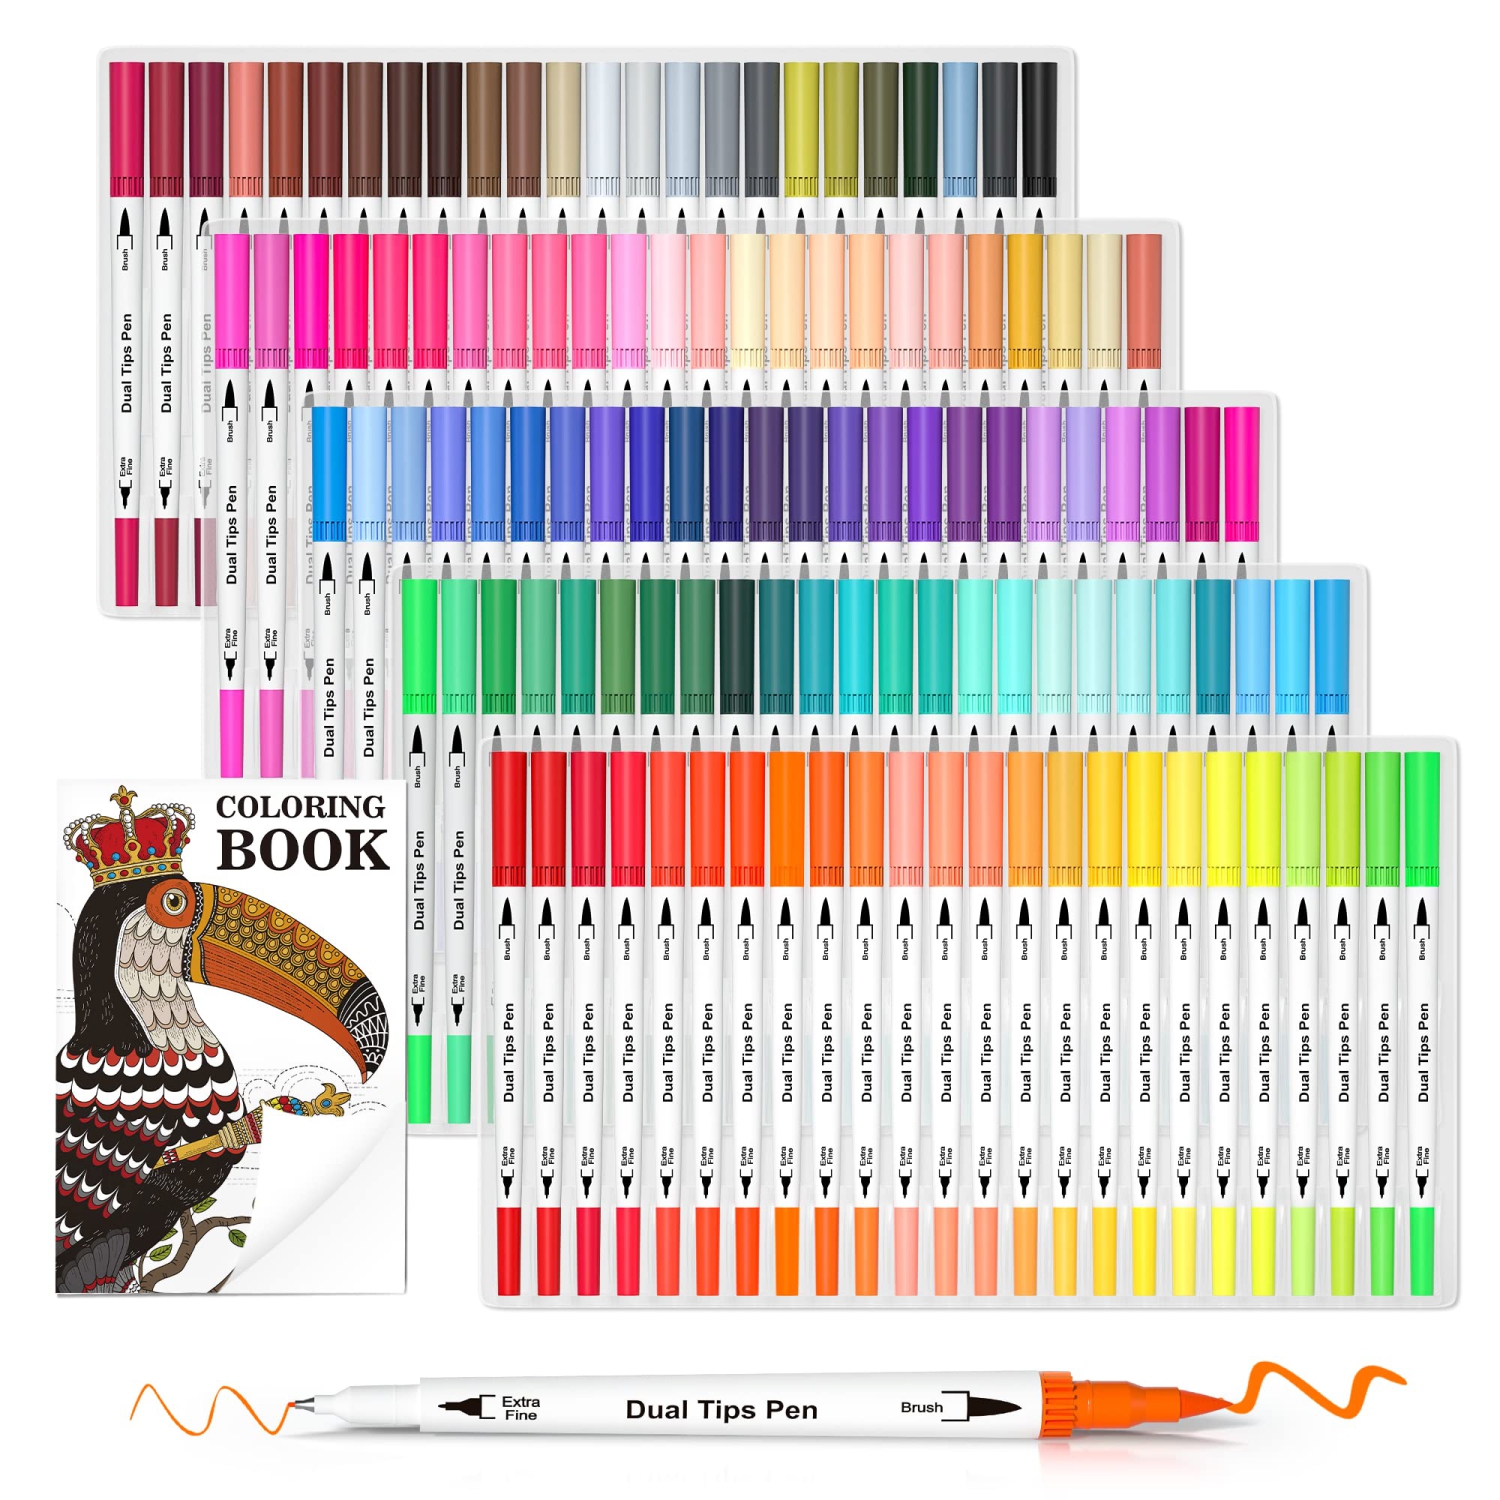 Vibrant 120 Colors Dual Tips Brush Pens Art Markers Set with Coloring Book - Ideal for Adults, Kids, Calligraphy, Journaling, Lettering, and Drawing